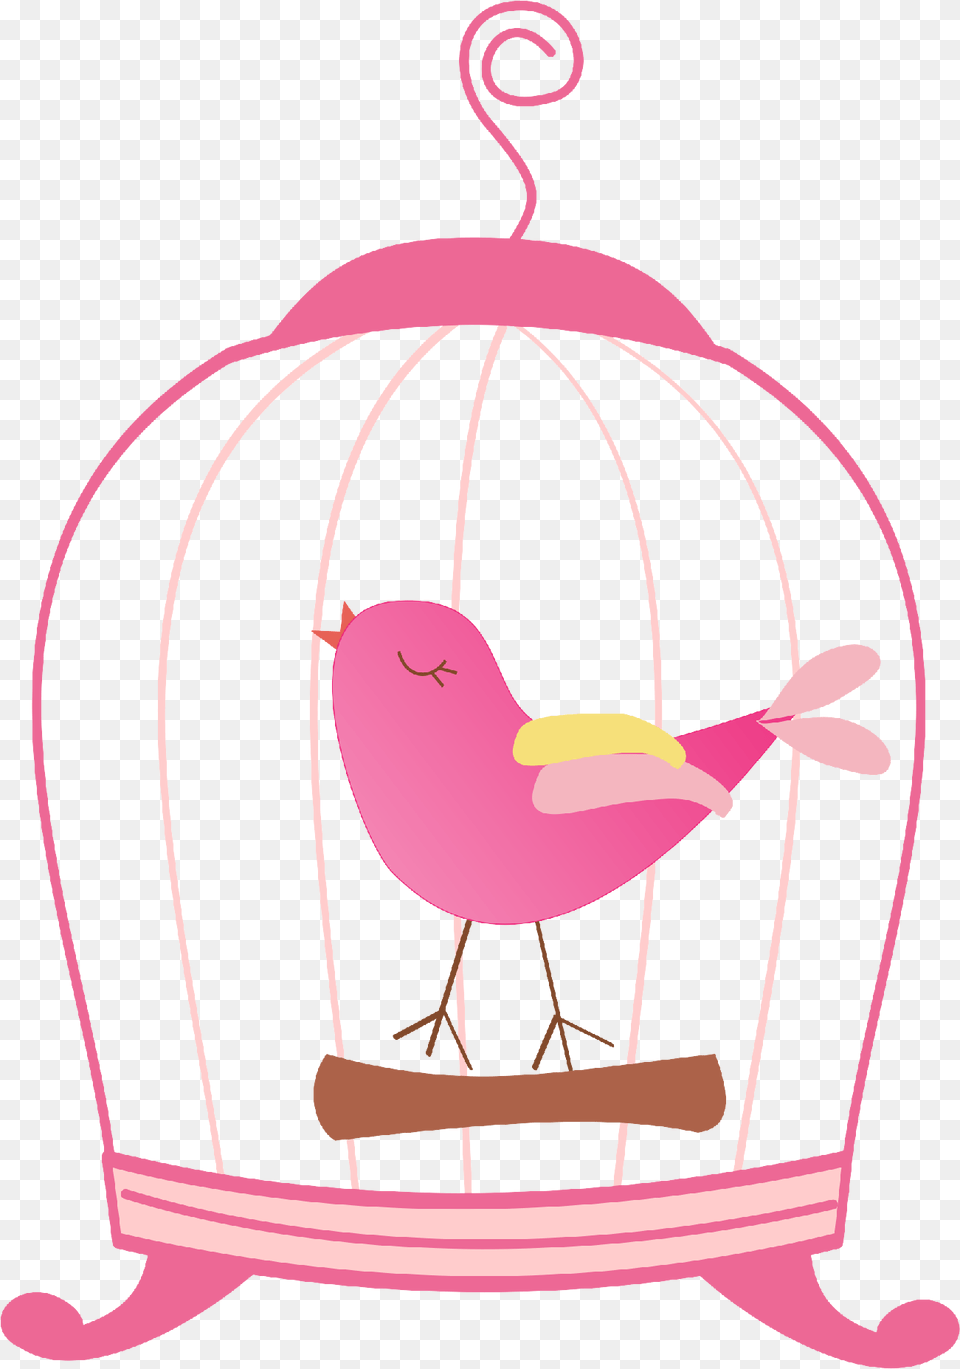 Bird In A Cage Clipart Bird In Birdcage Clipart, Animal, Finch Png Image